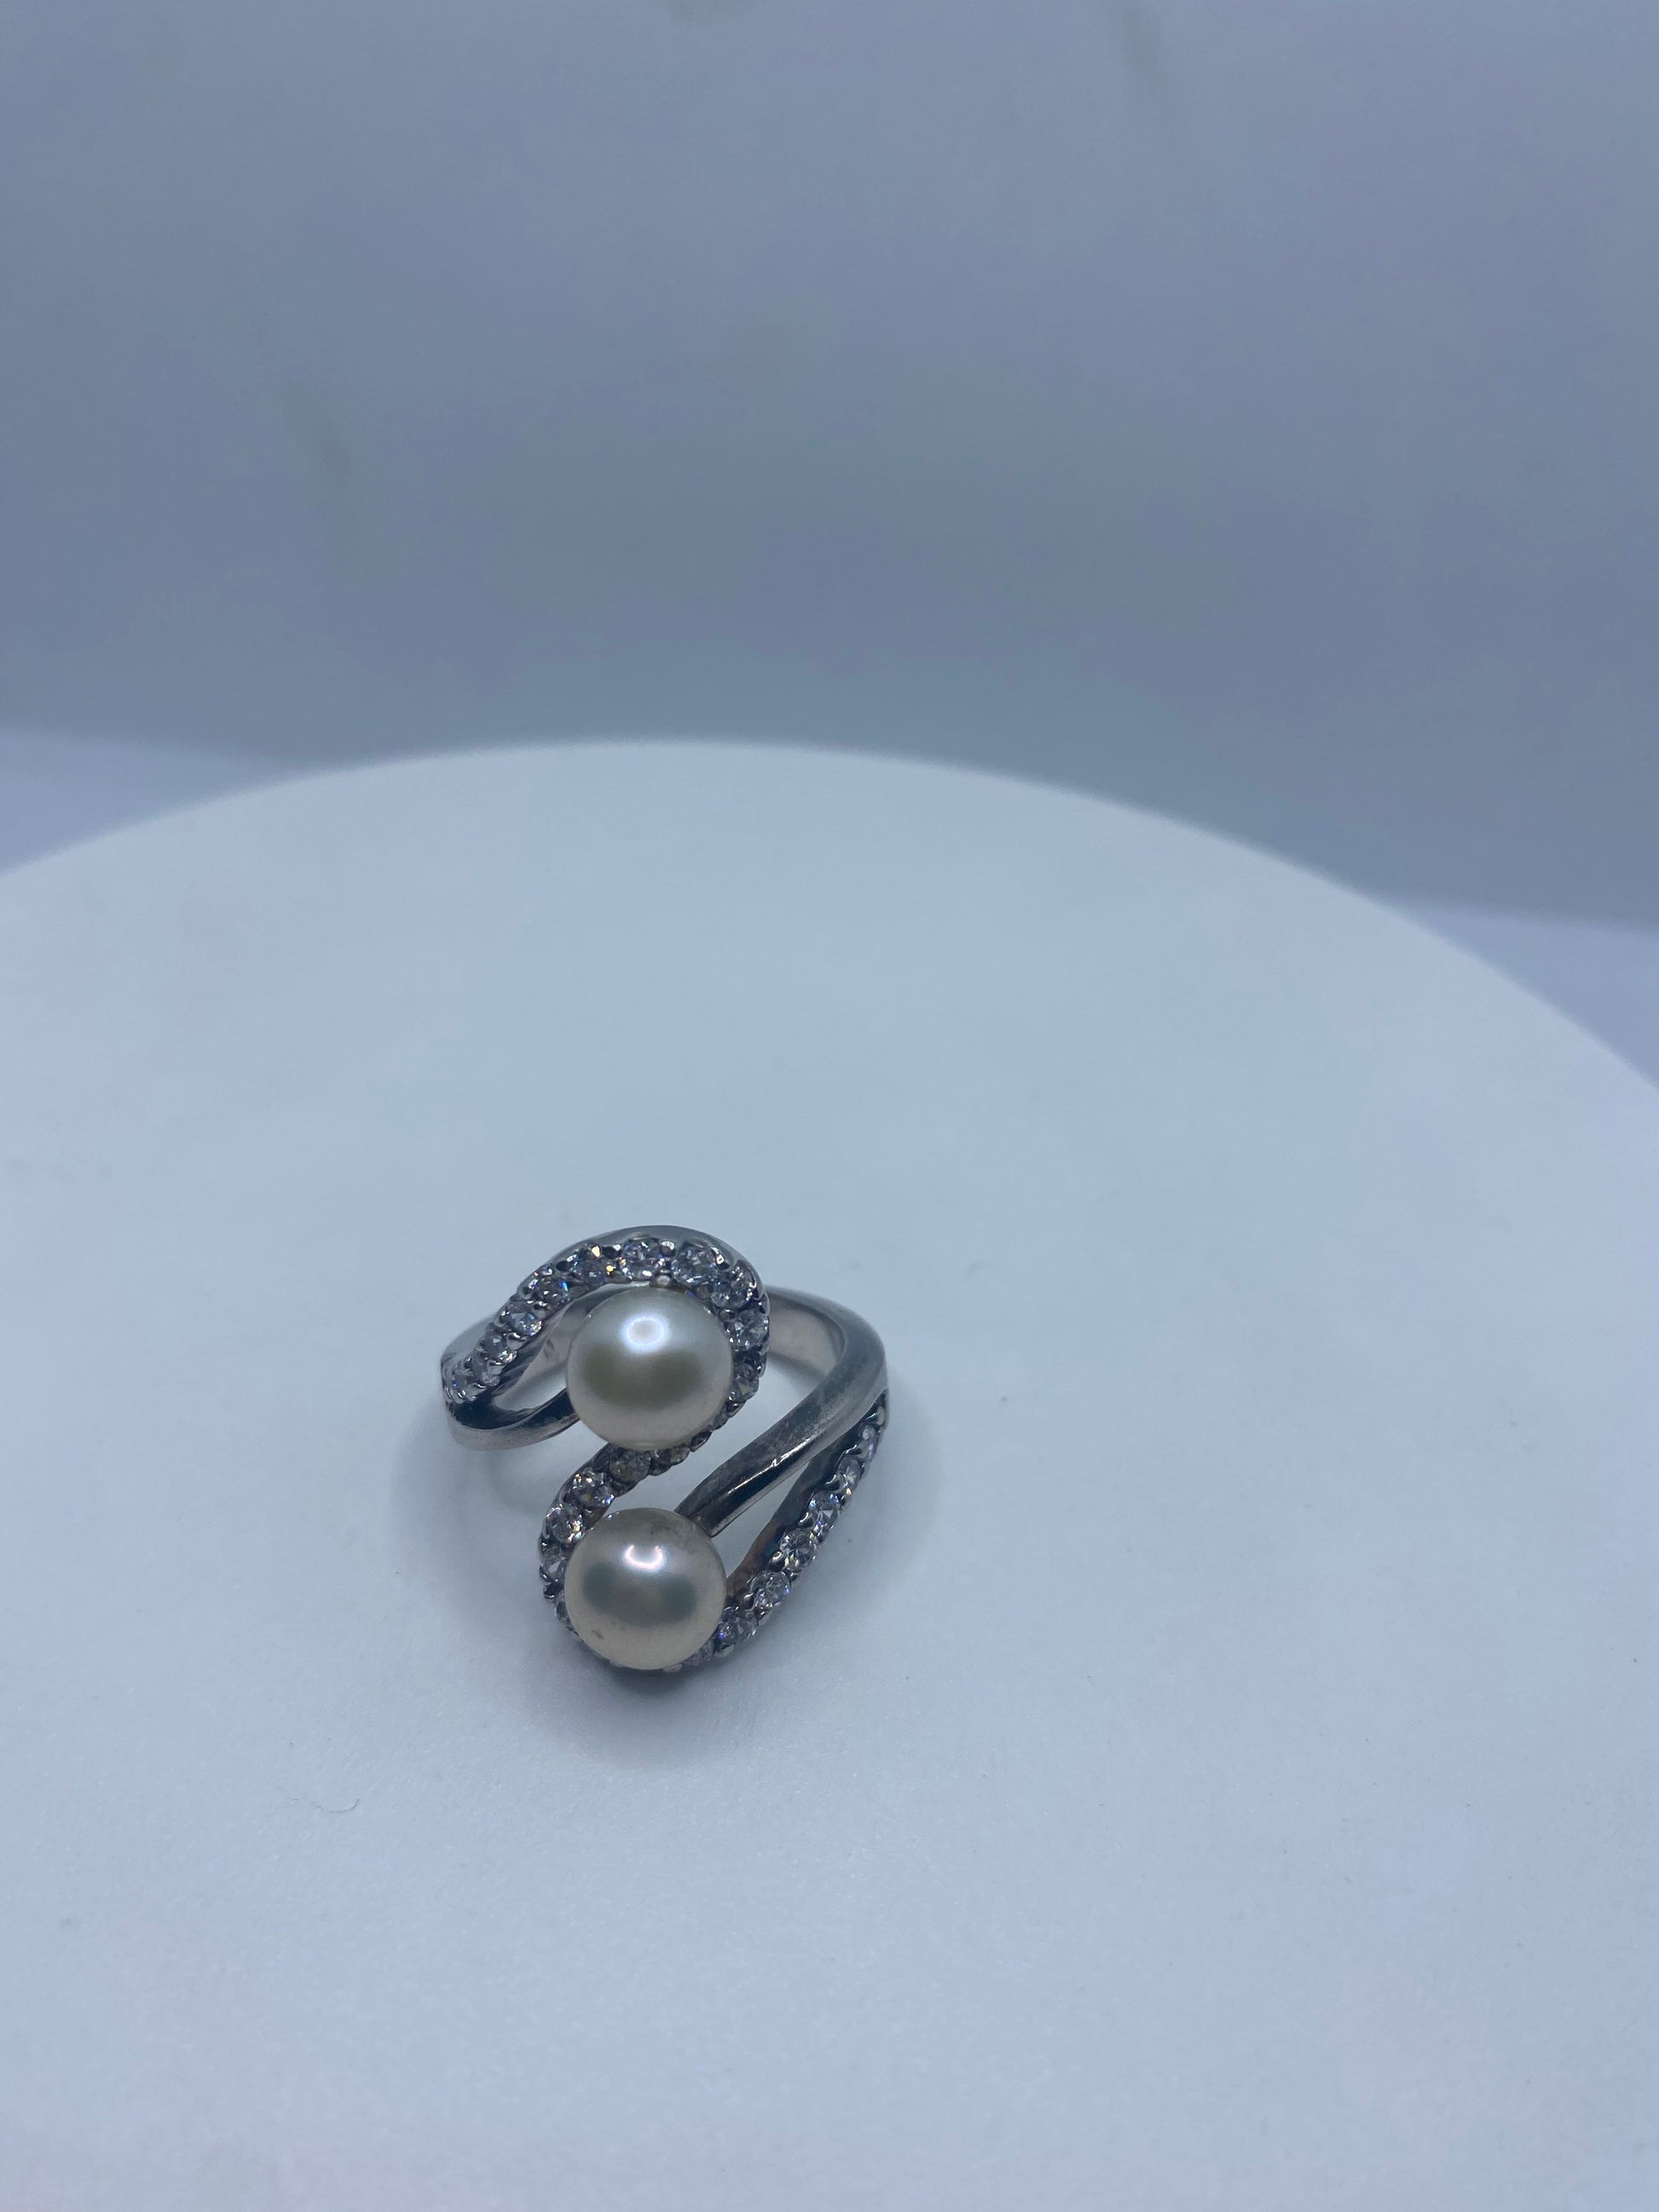 Vintage White Pearl 925 Sterling Silver Cocktail Ring Size 8